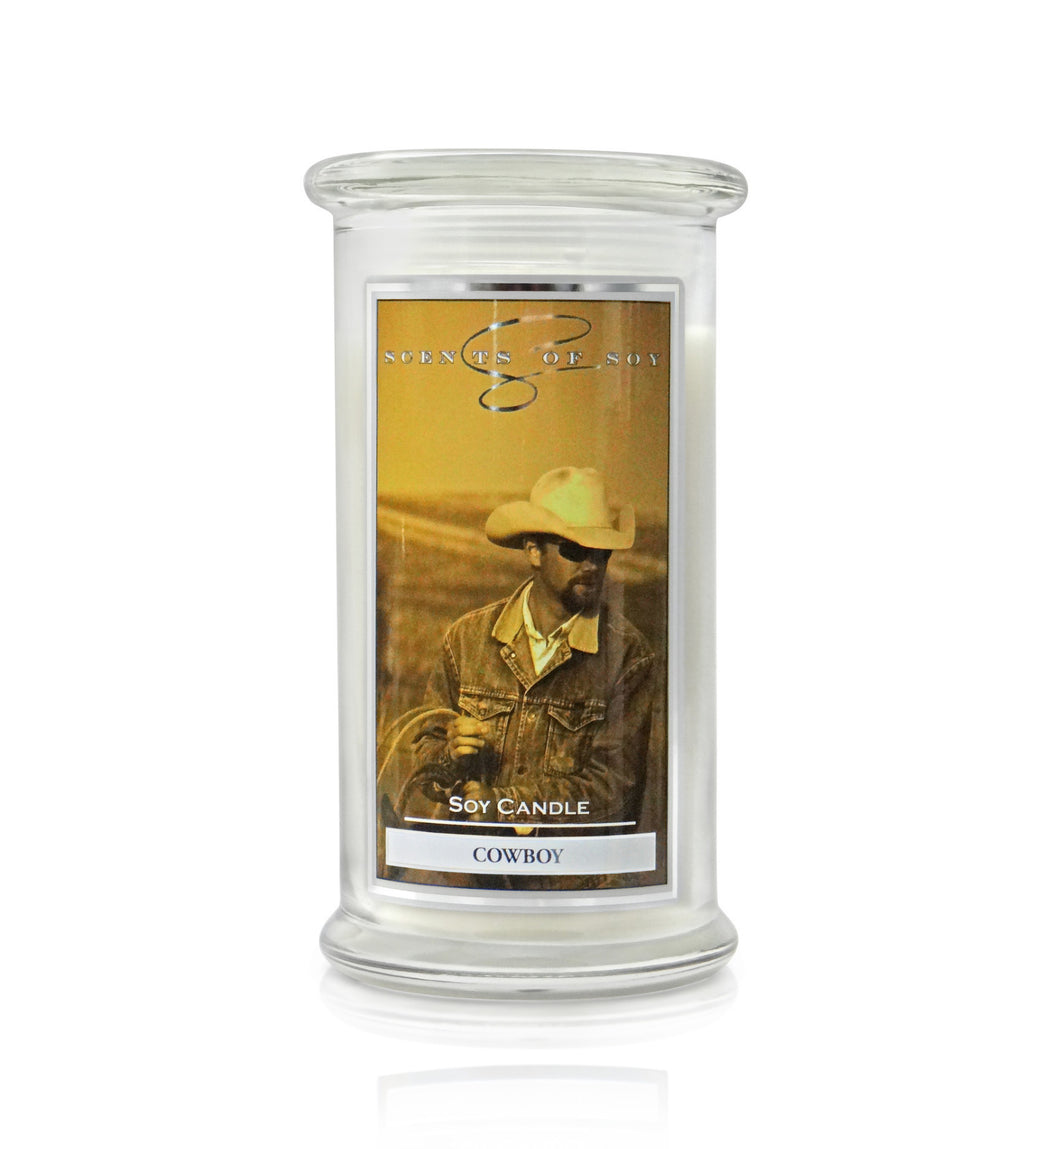 Cowboy Soy Candle